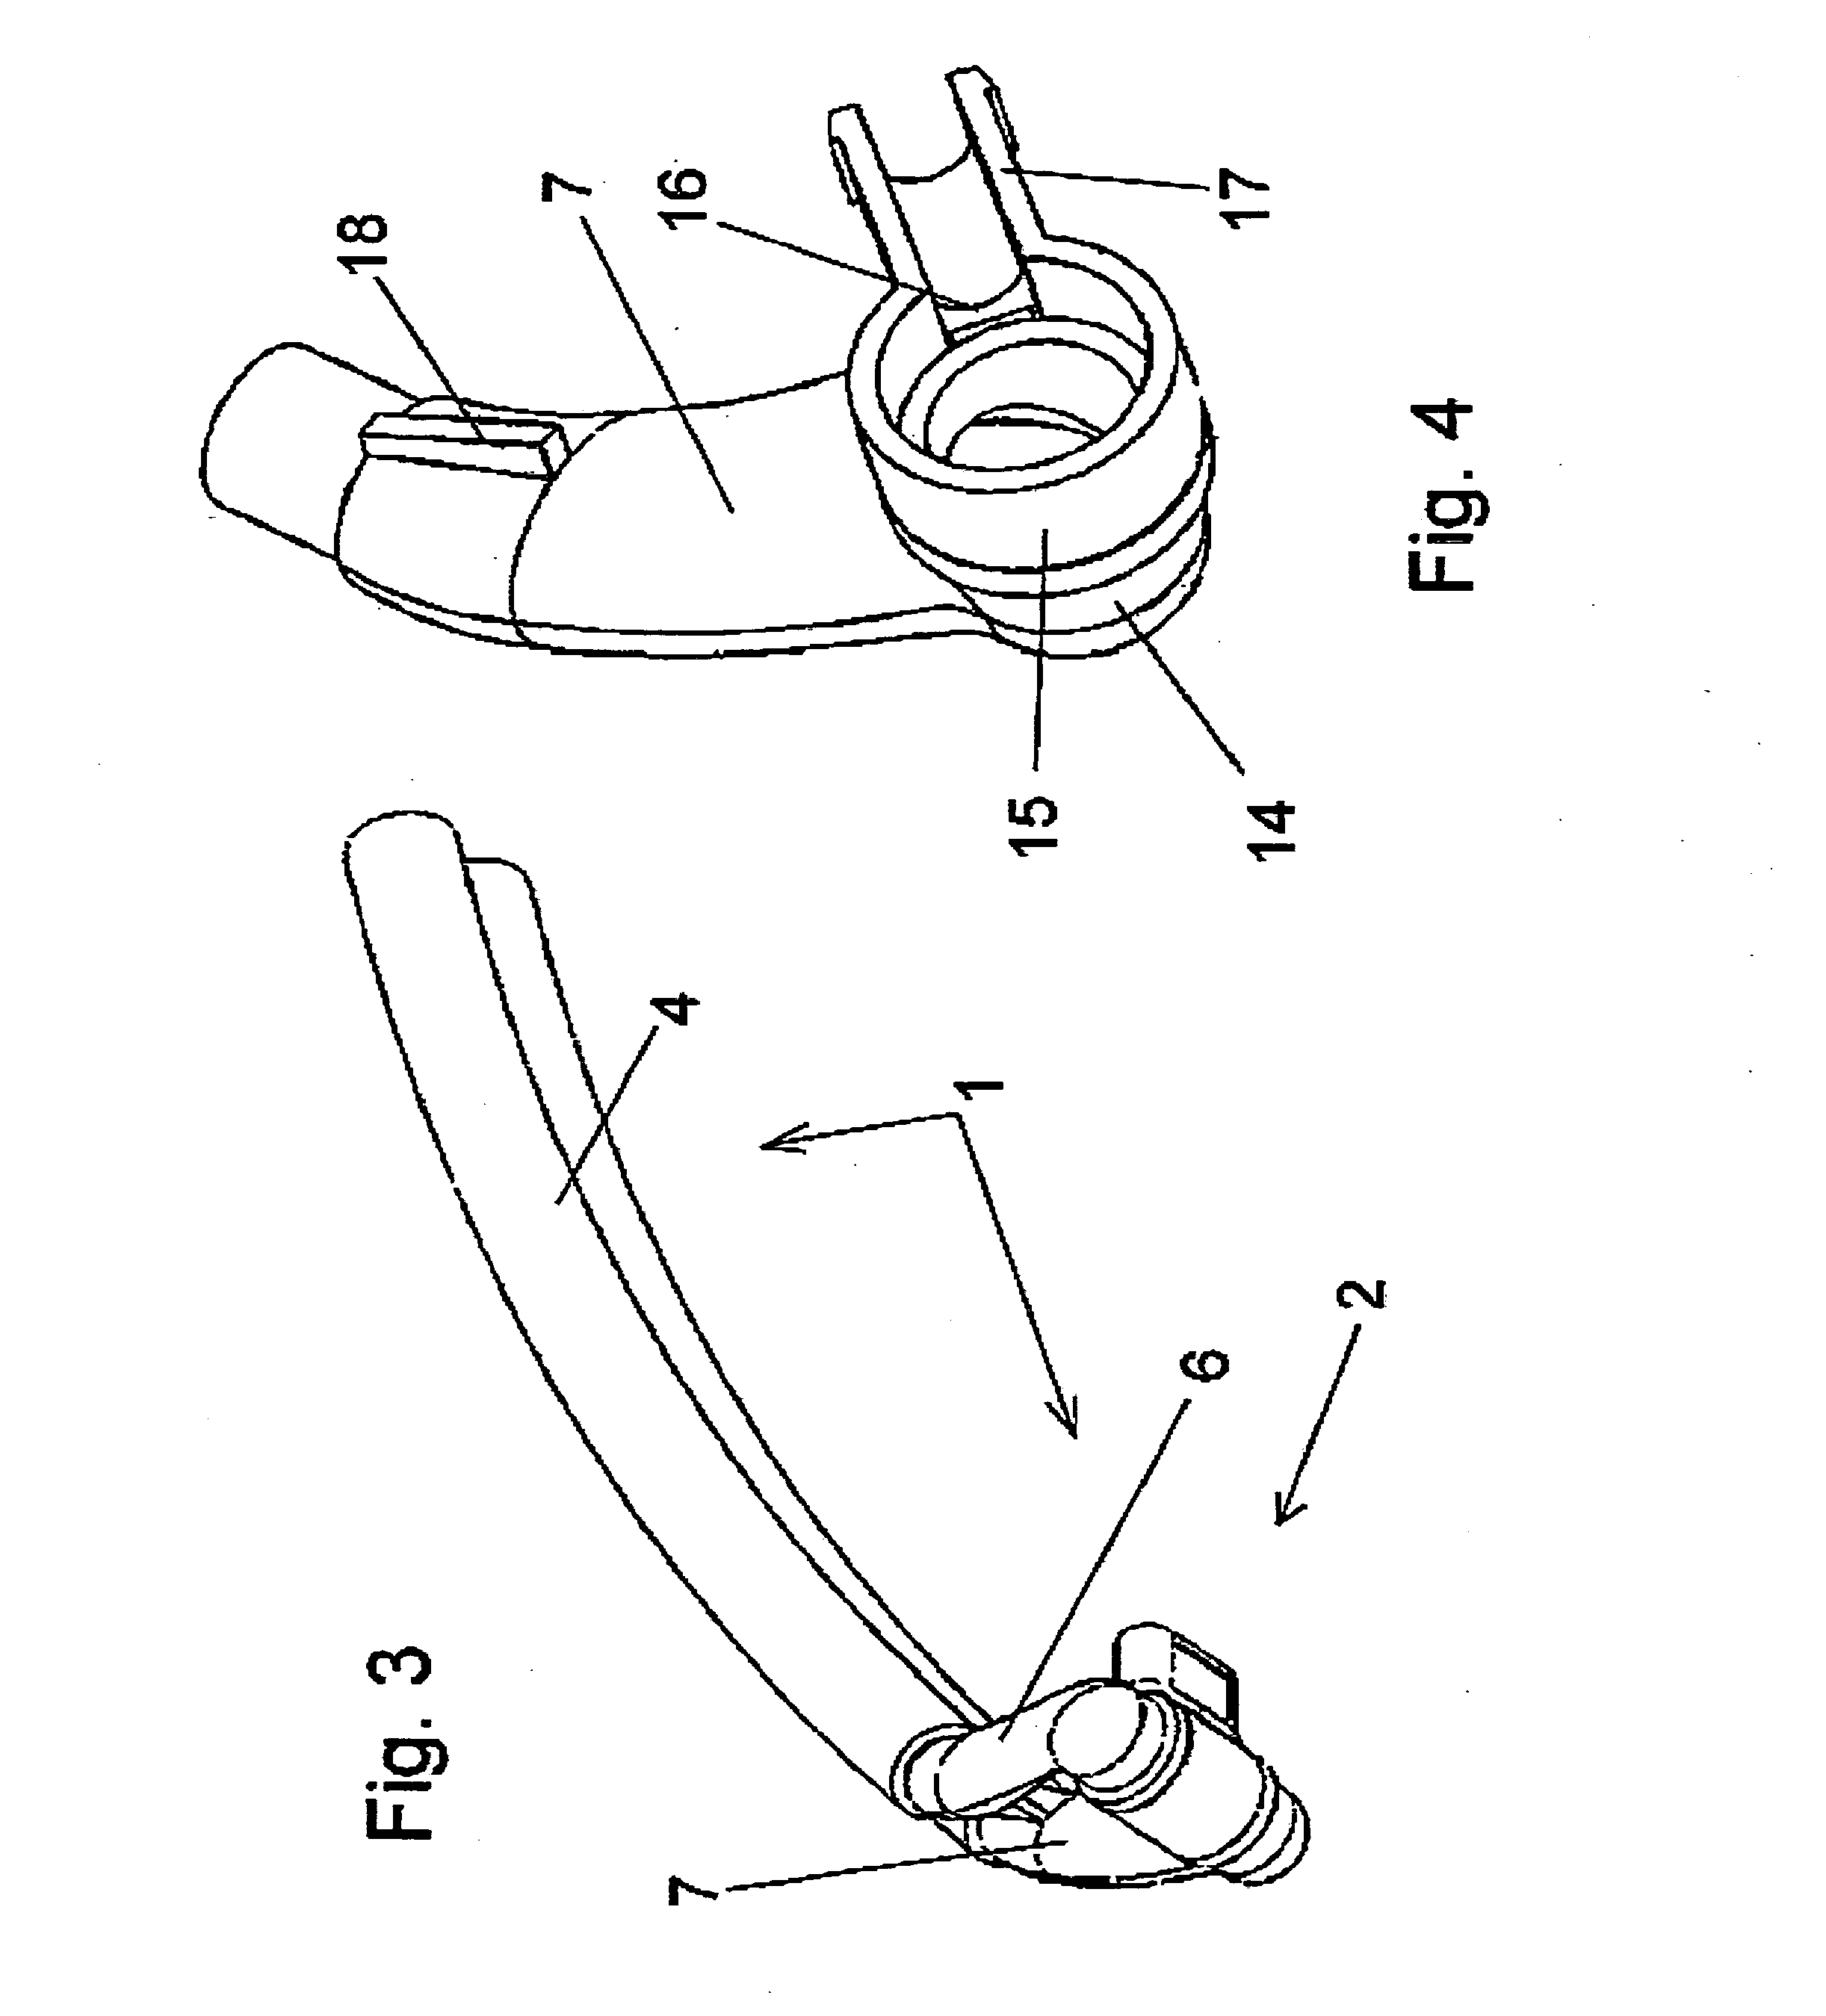 Nasal adapter system for cpap respiration